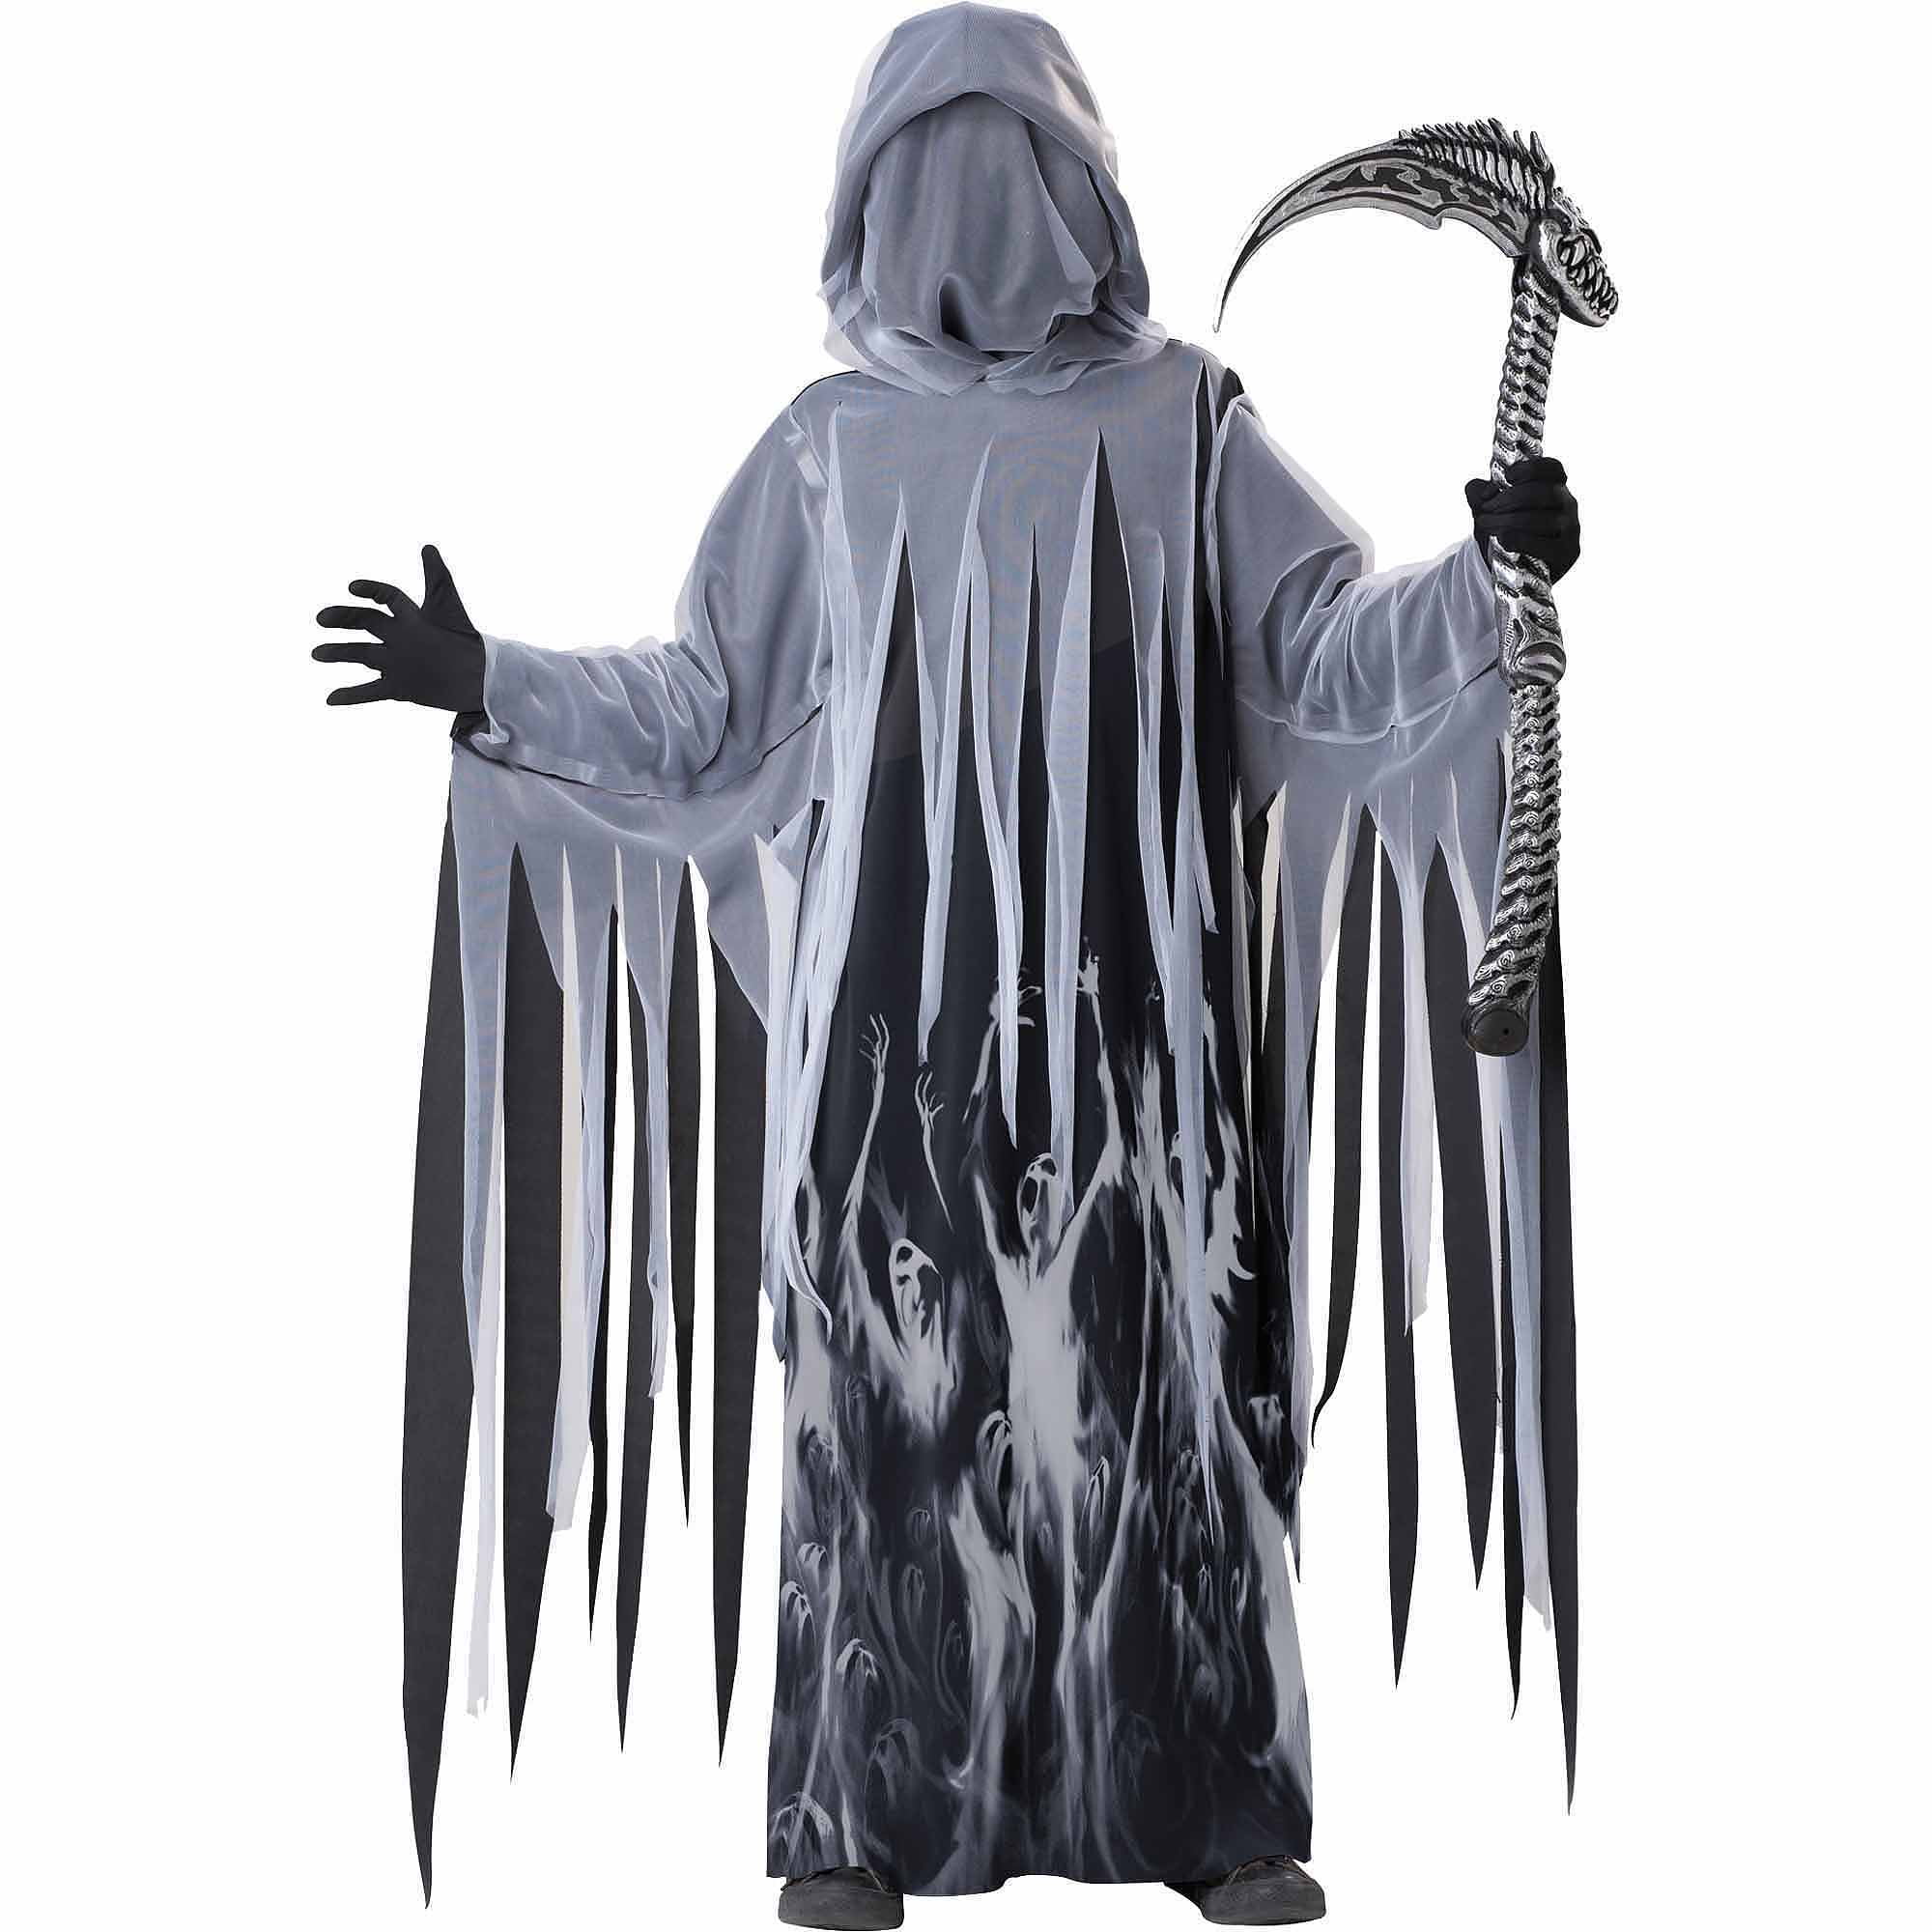 ZOMBIE,GHOST LARGE AGE 9-12 GRIM REAPER CHILDS HALLOWEEN FANCY DRESS COSTUME 